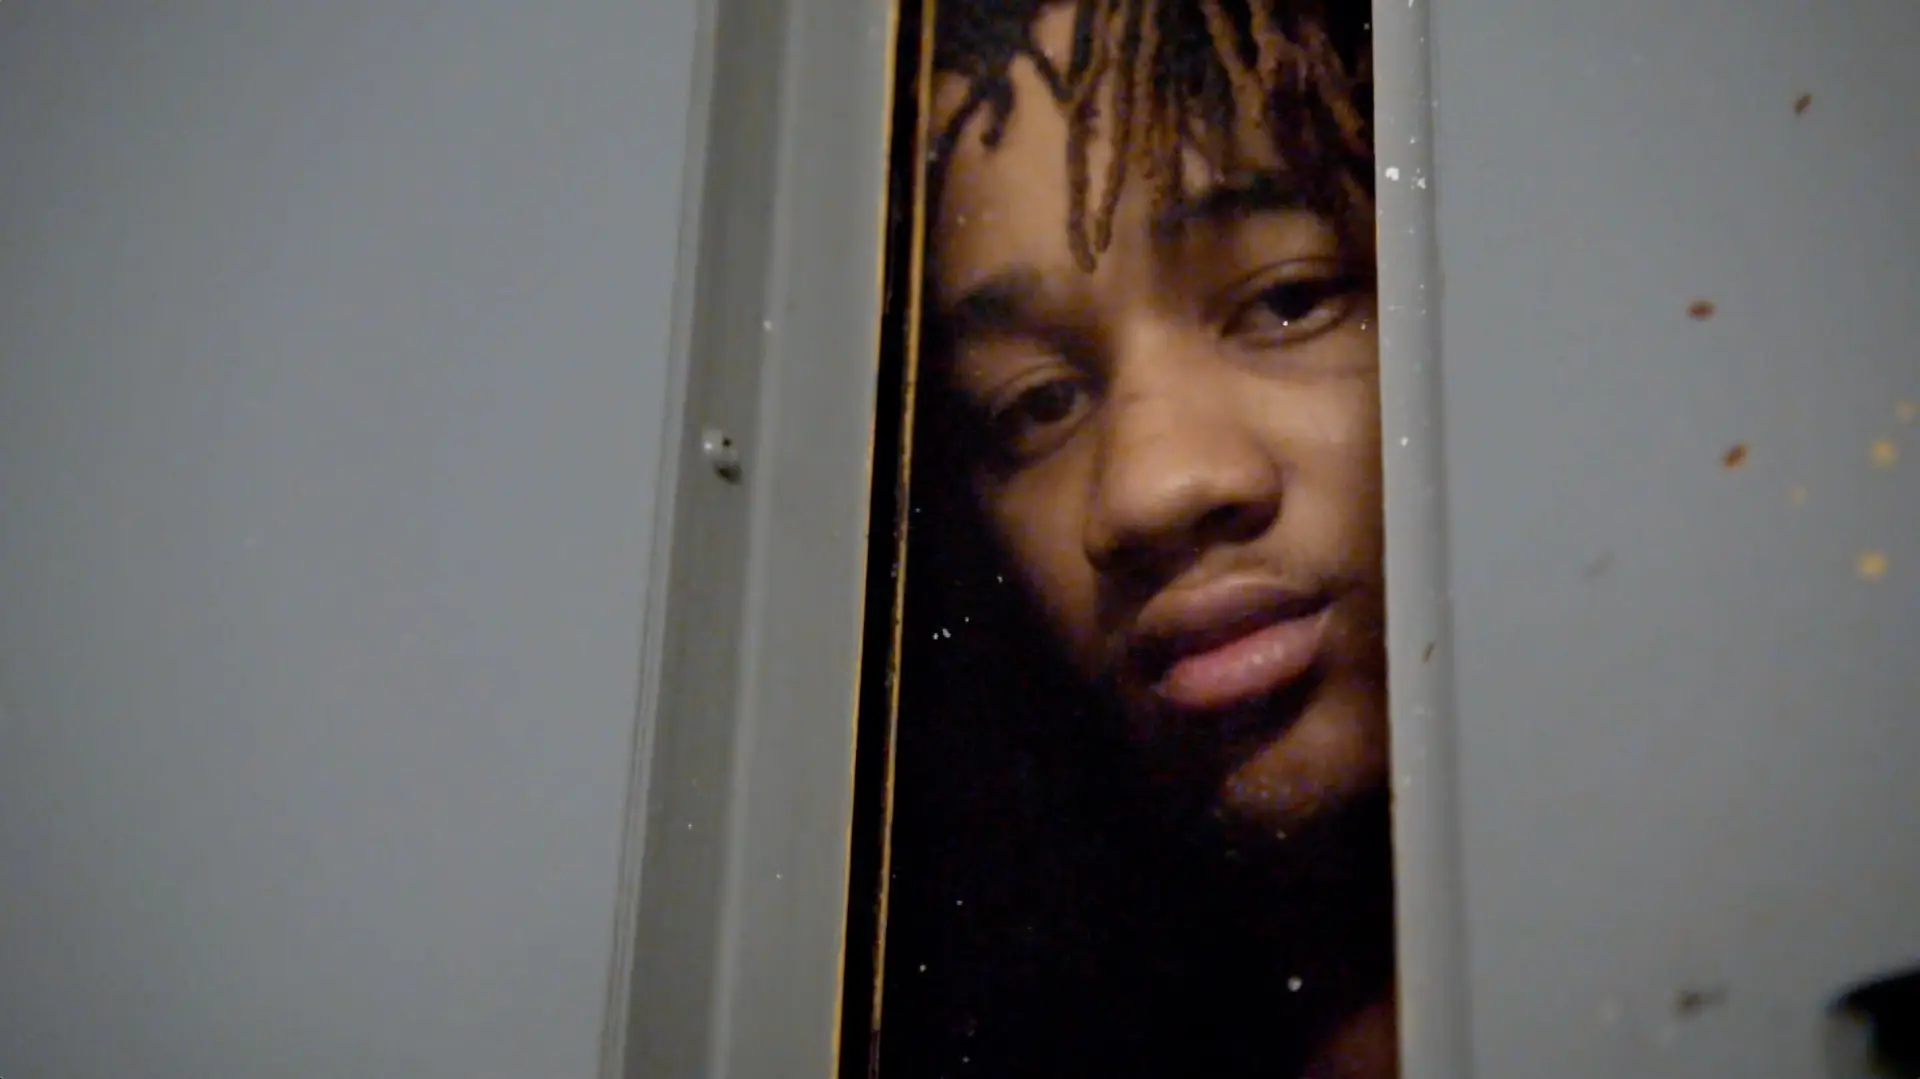 A man with dreadlocks, featuring in "60 Days In," peeking out of a door.